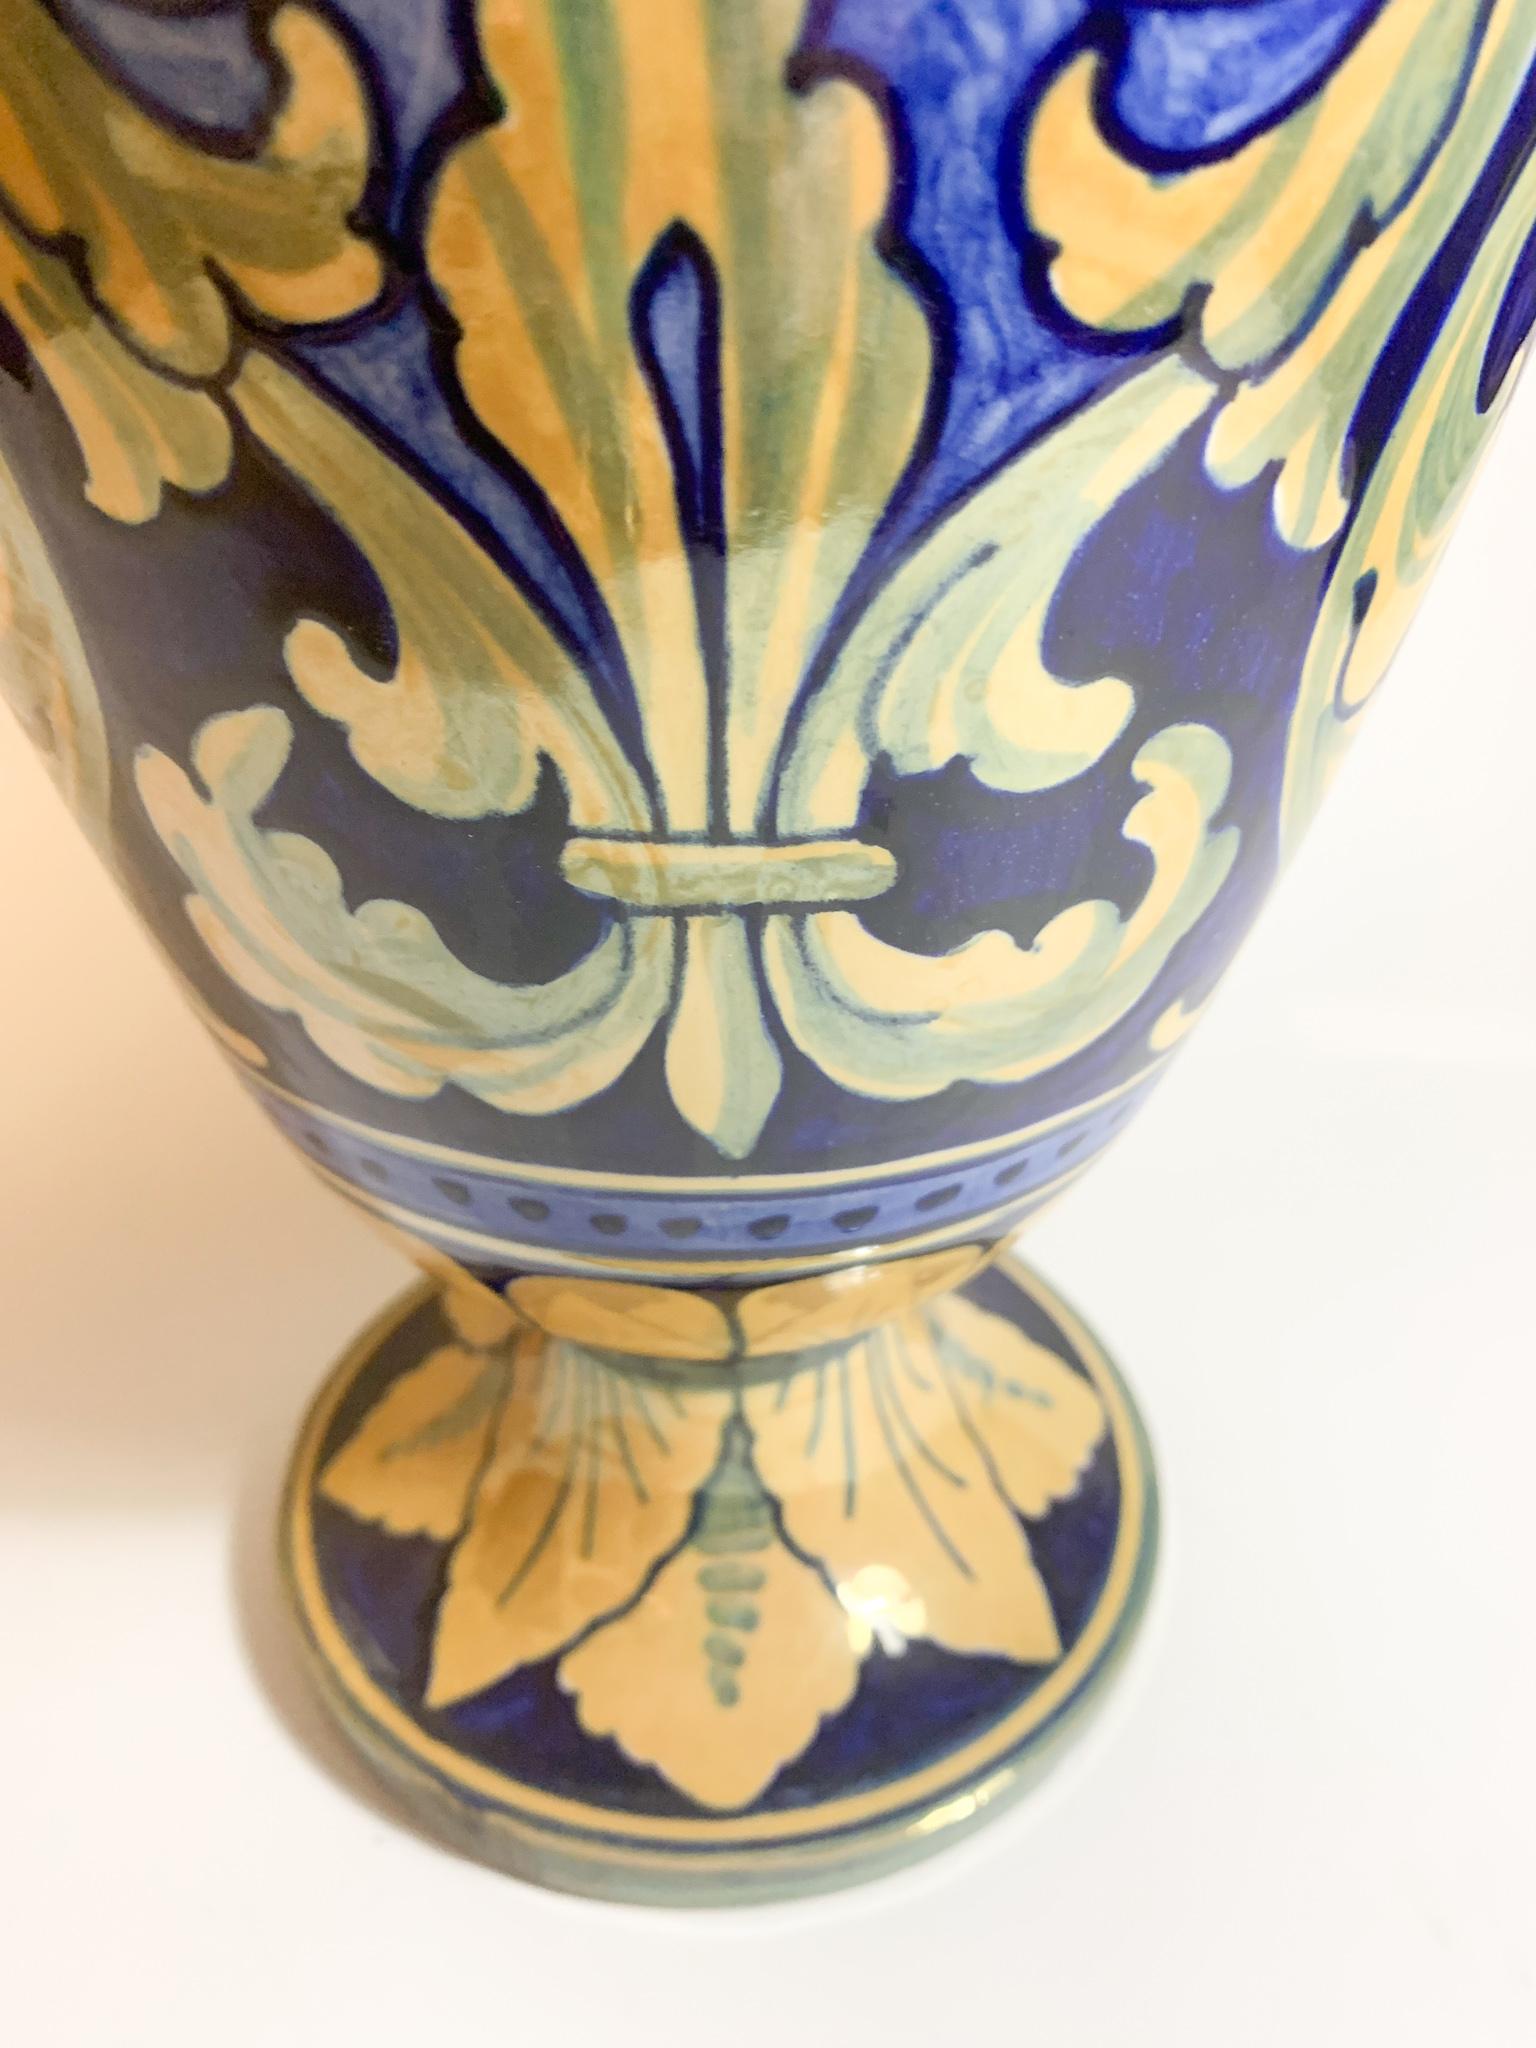 Italian Hand Painted Iridescent Ceramic Vase by Gualdo Tadino from the 1950s For Sale 7